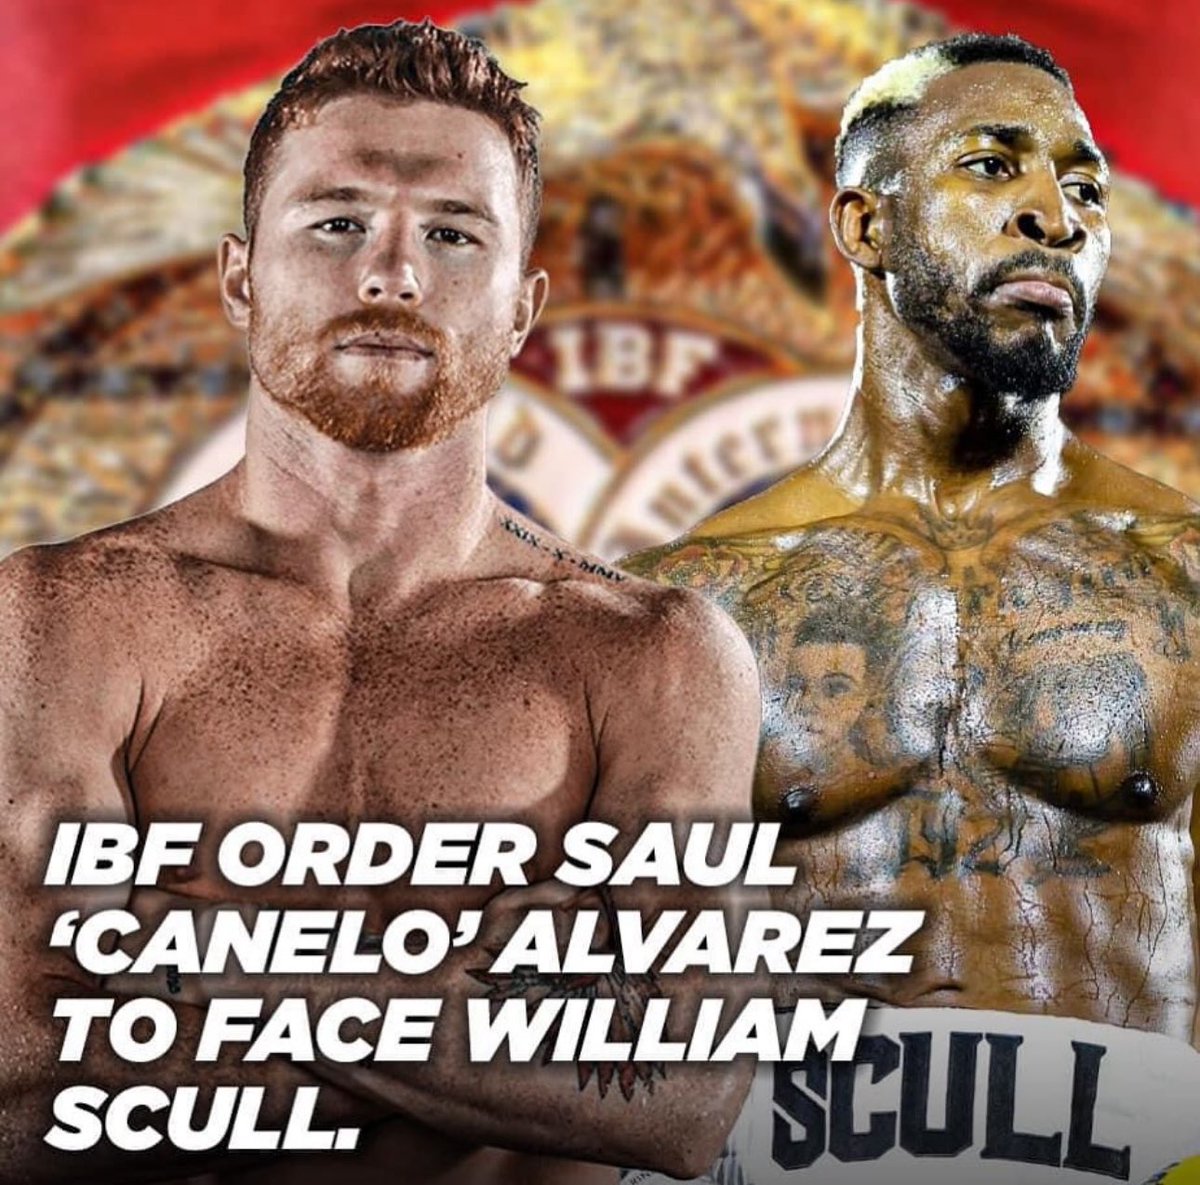 Looks like Canelo Alvarez Undisputed Reign will come to an end because the IBF has ordered him to fight unknown #1 Contender William Scull 22-0. Canelo will have more lucrative paydays against Benavidez or Berlanga Next. #caneloalvarez #ibfboxing #undisputed #poundforpound